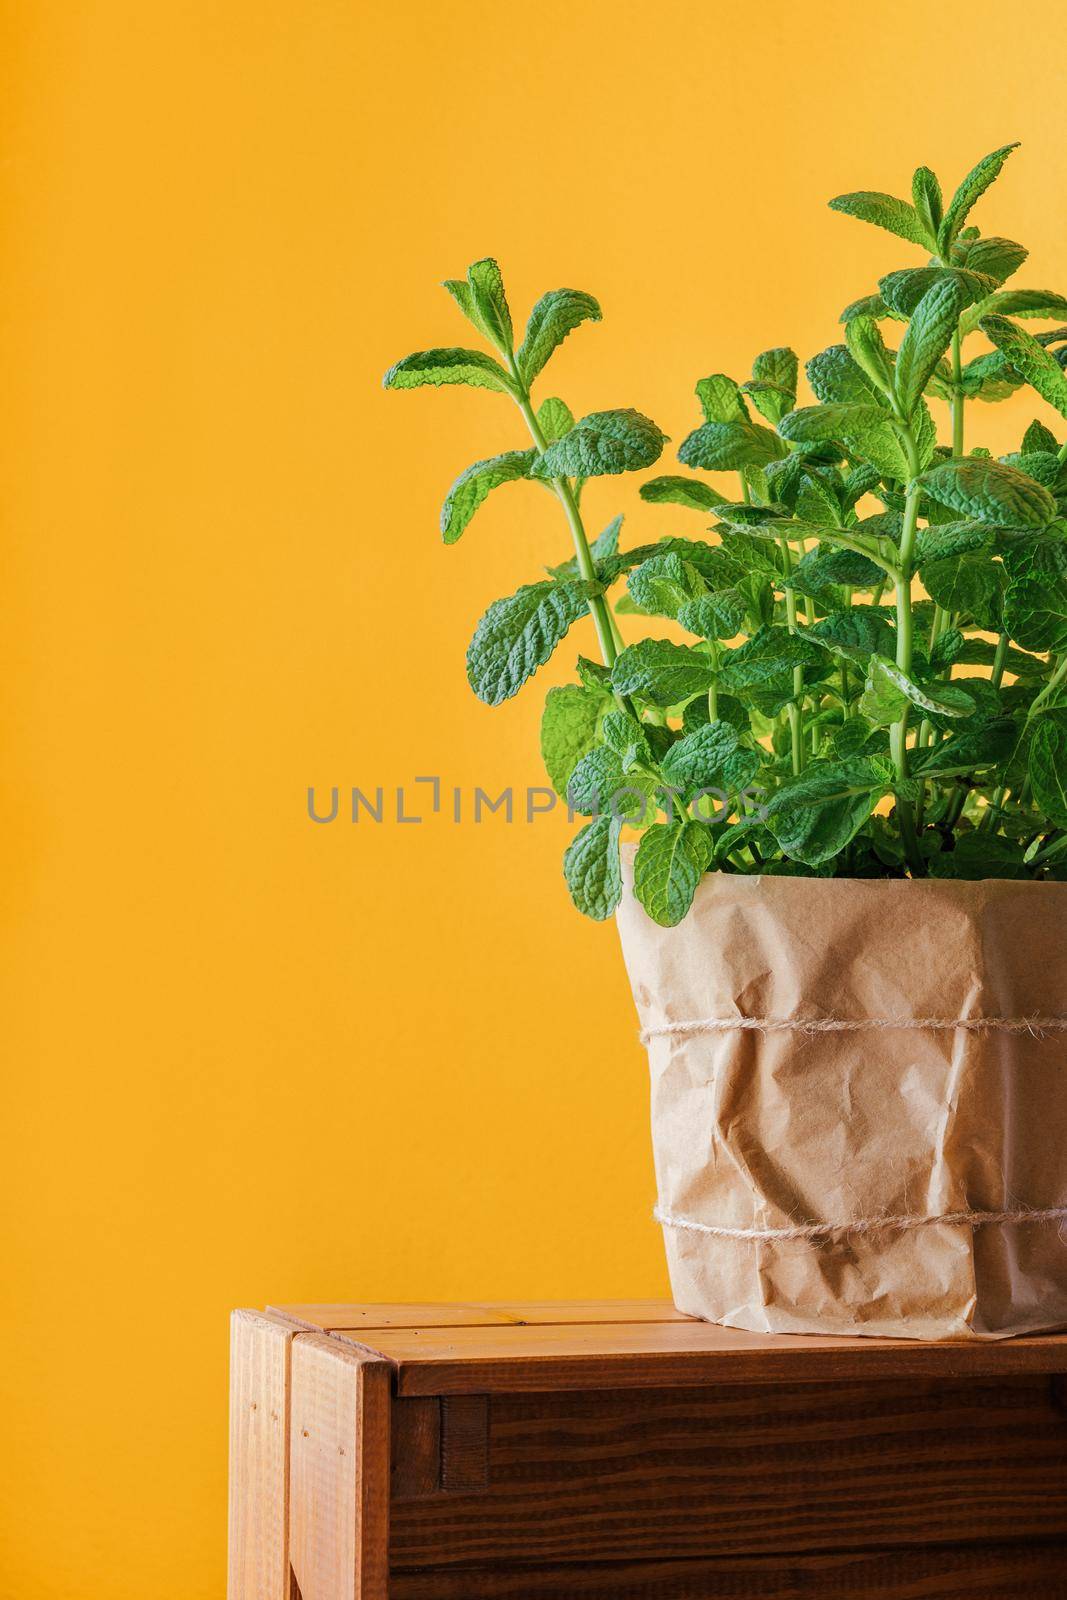 Mint plant grows at home in paper pot on wooden box. Home gardening for fresh and natural greens. by apavlin